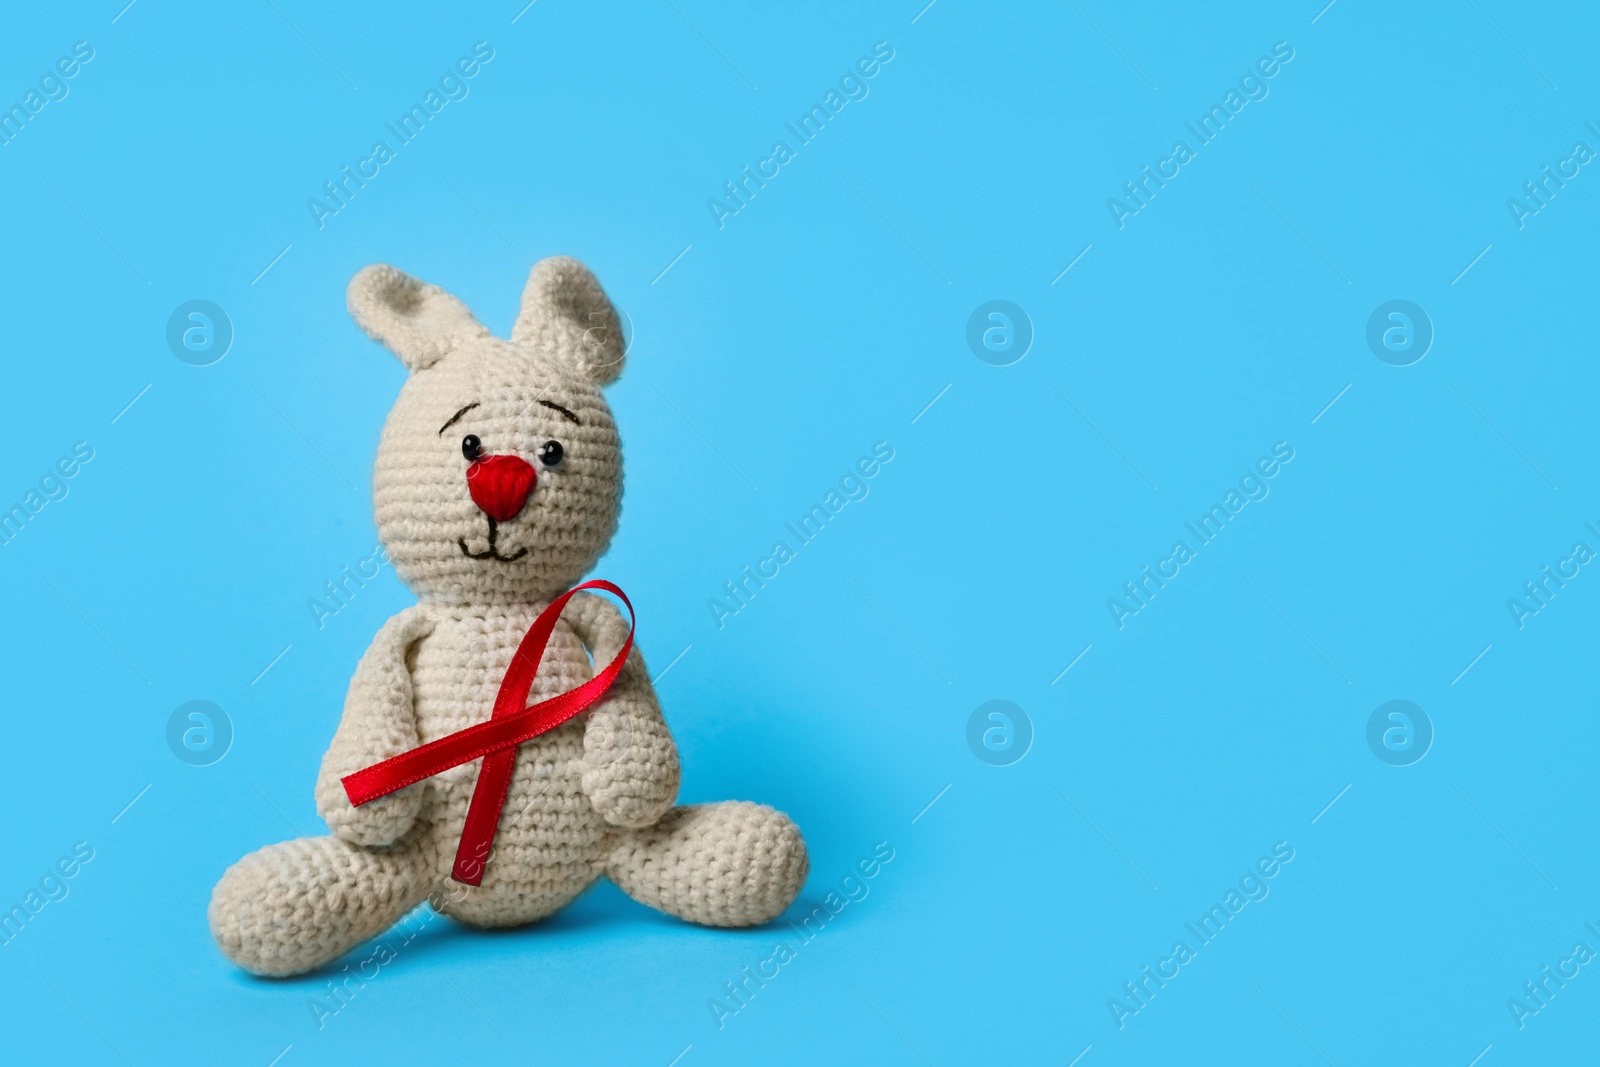 Photo of Cute knitted toy bunny with red ribbon on blue background, space for text. AIDS disease awareness